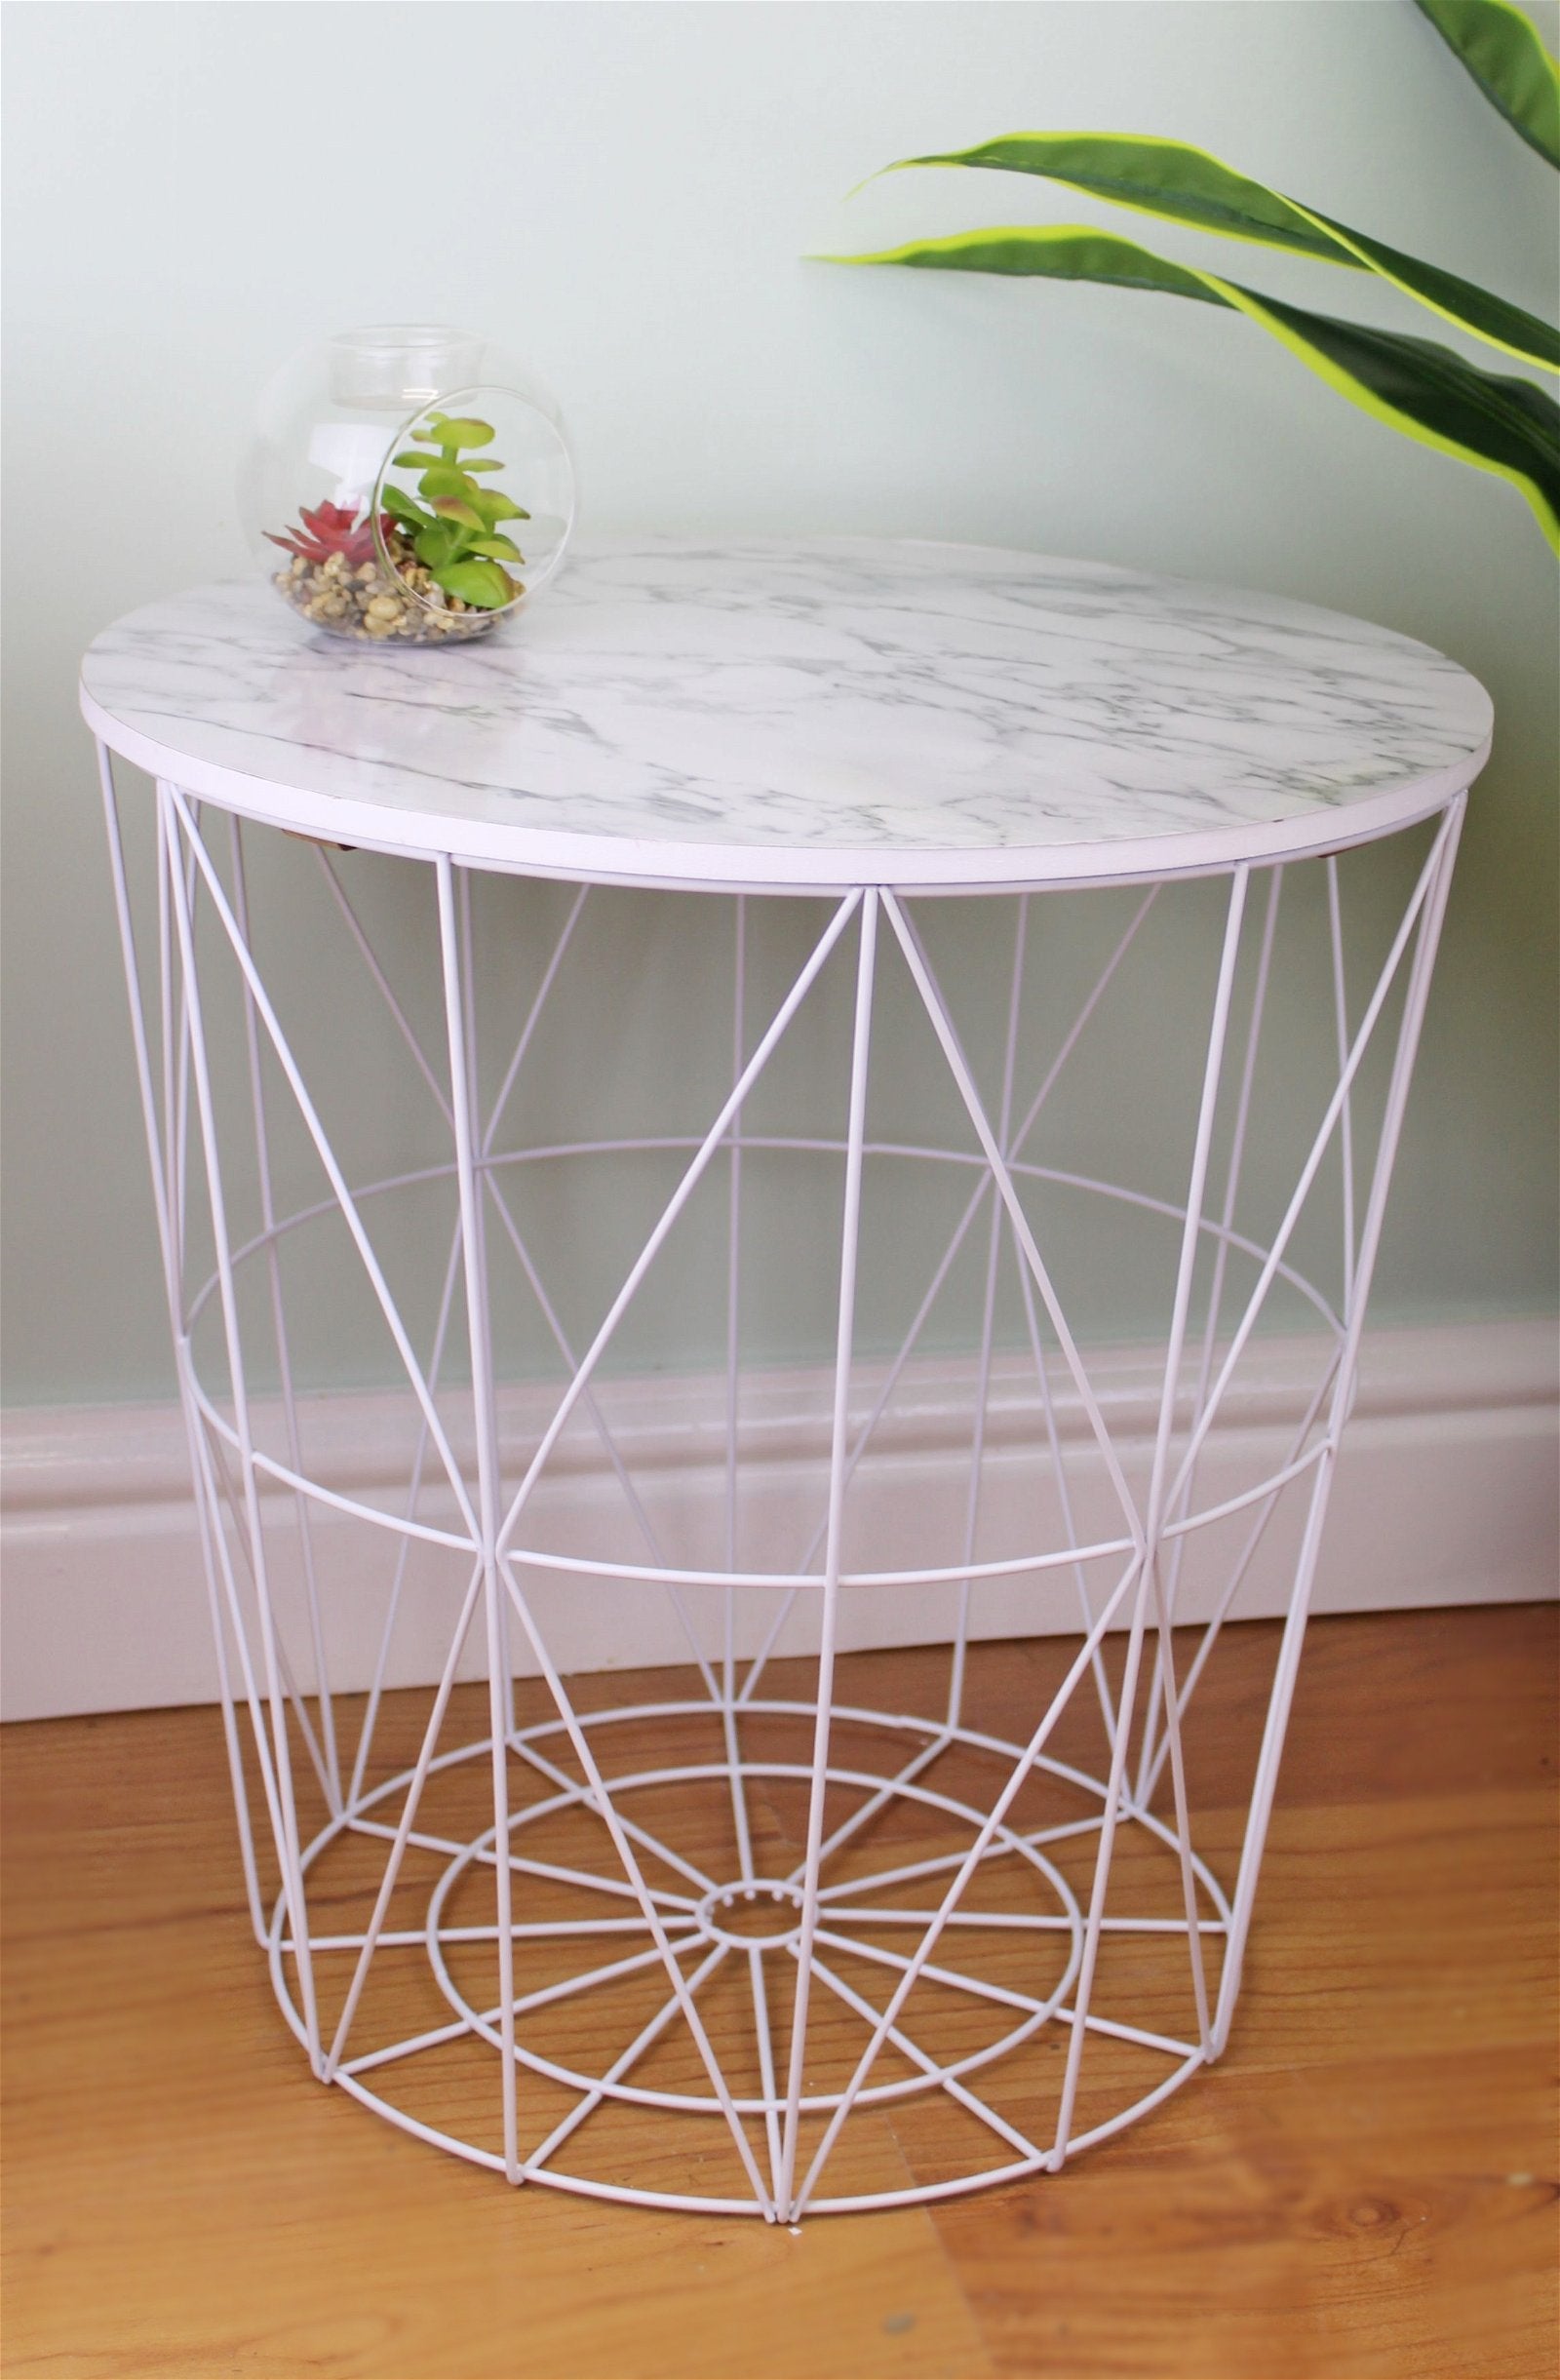 Circular Geometric Side Table White & Marble Effect